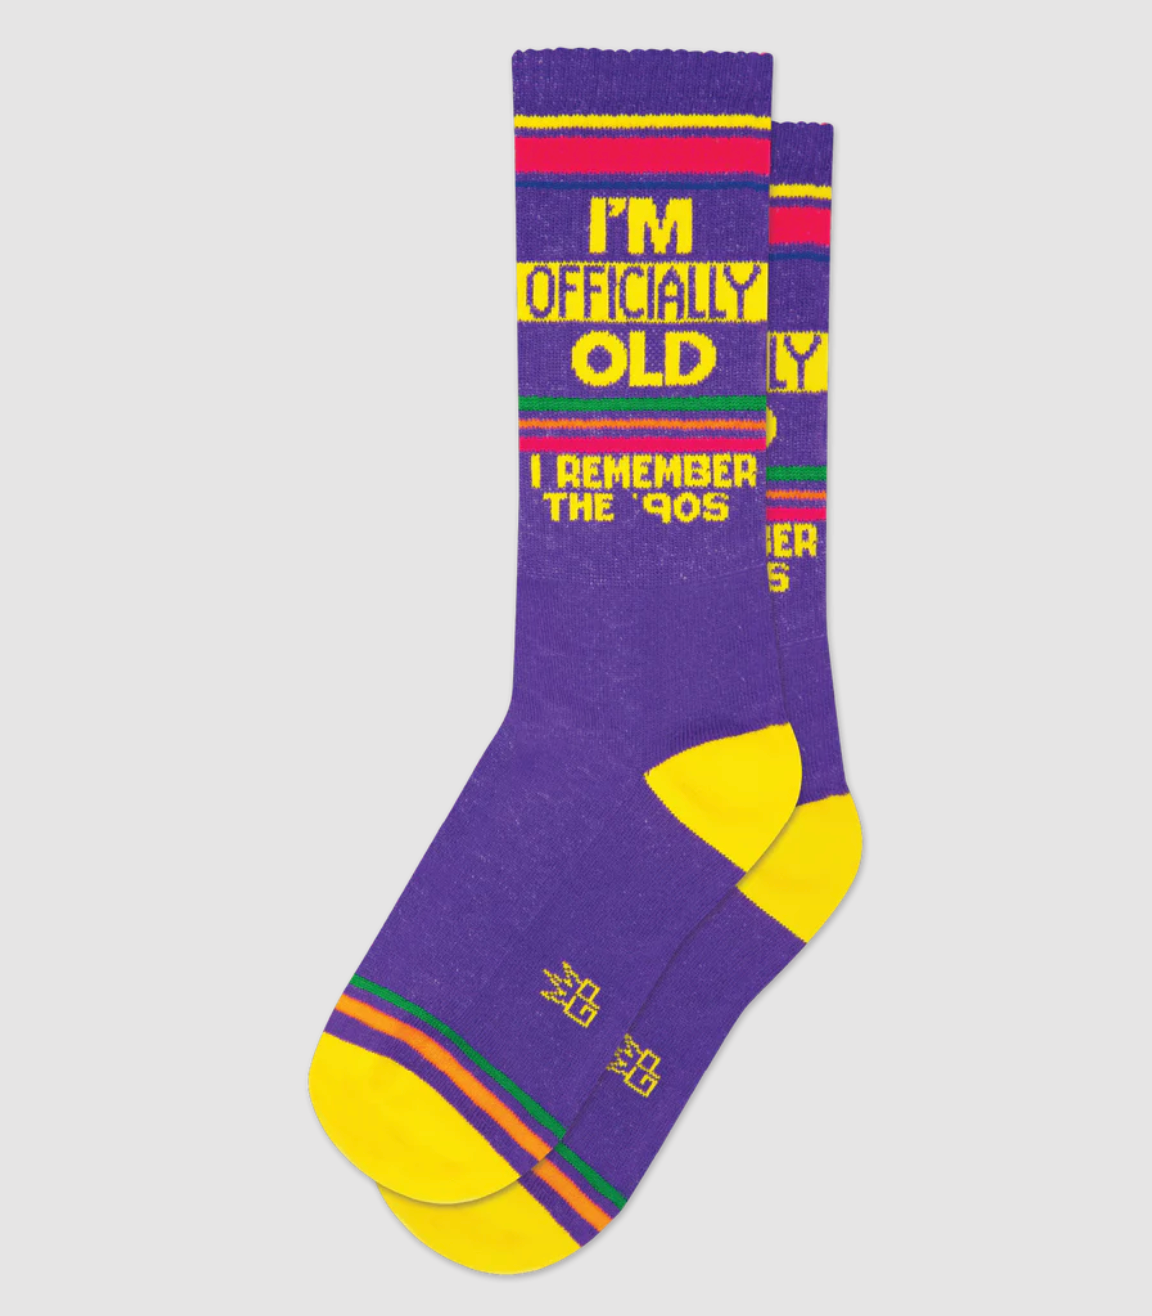 I'M OFFICIALLY OLD...I REMEMBER THE '90S Gym Crew Socks